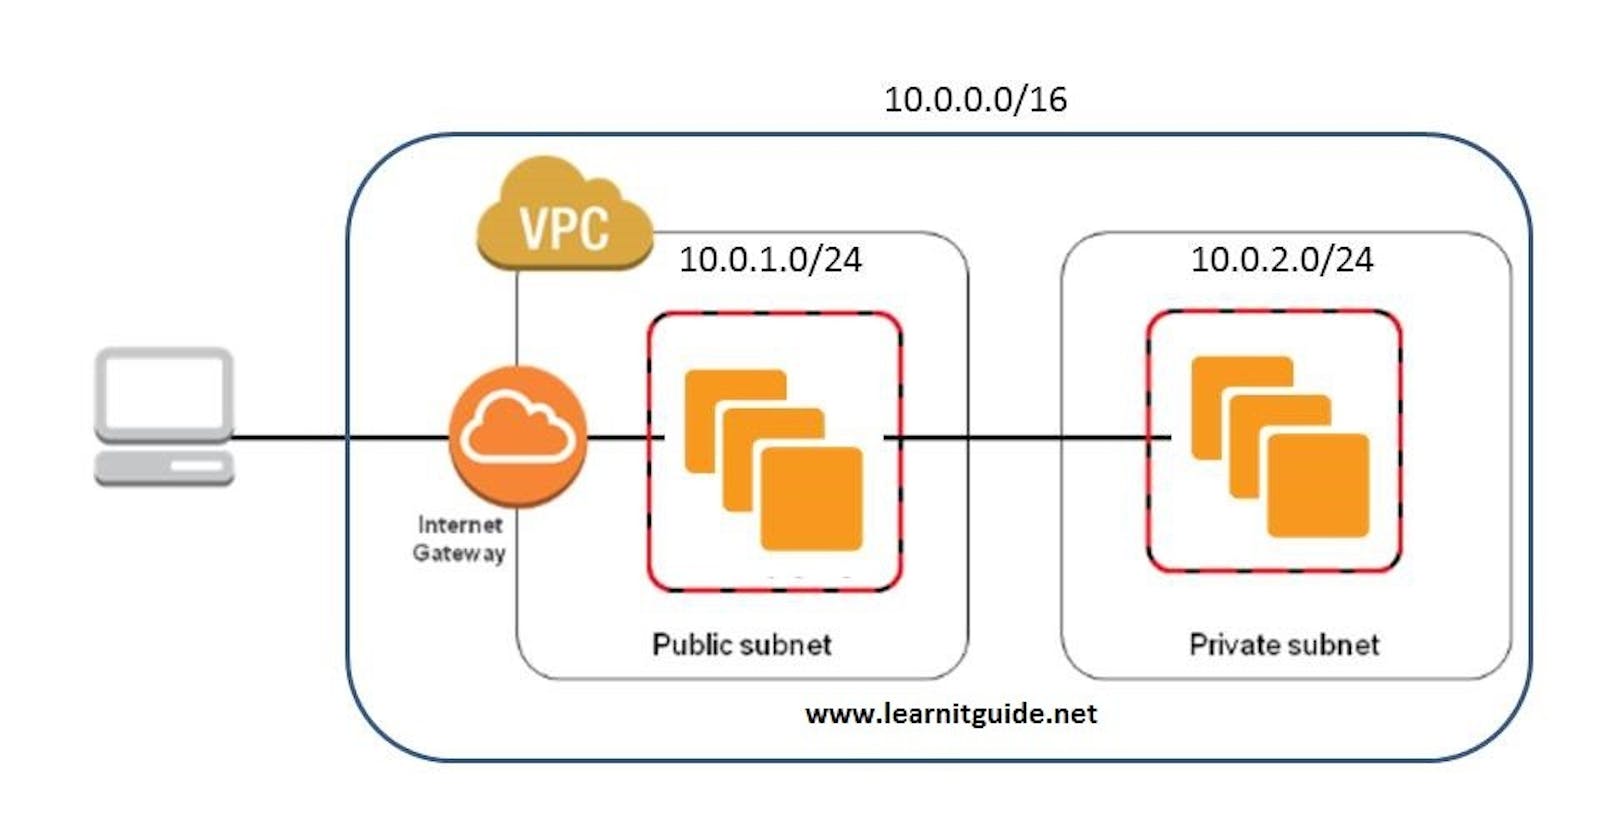 Setting Up VPC with Public and Private Subnets